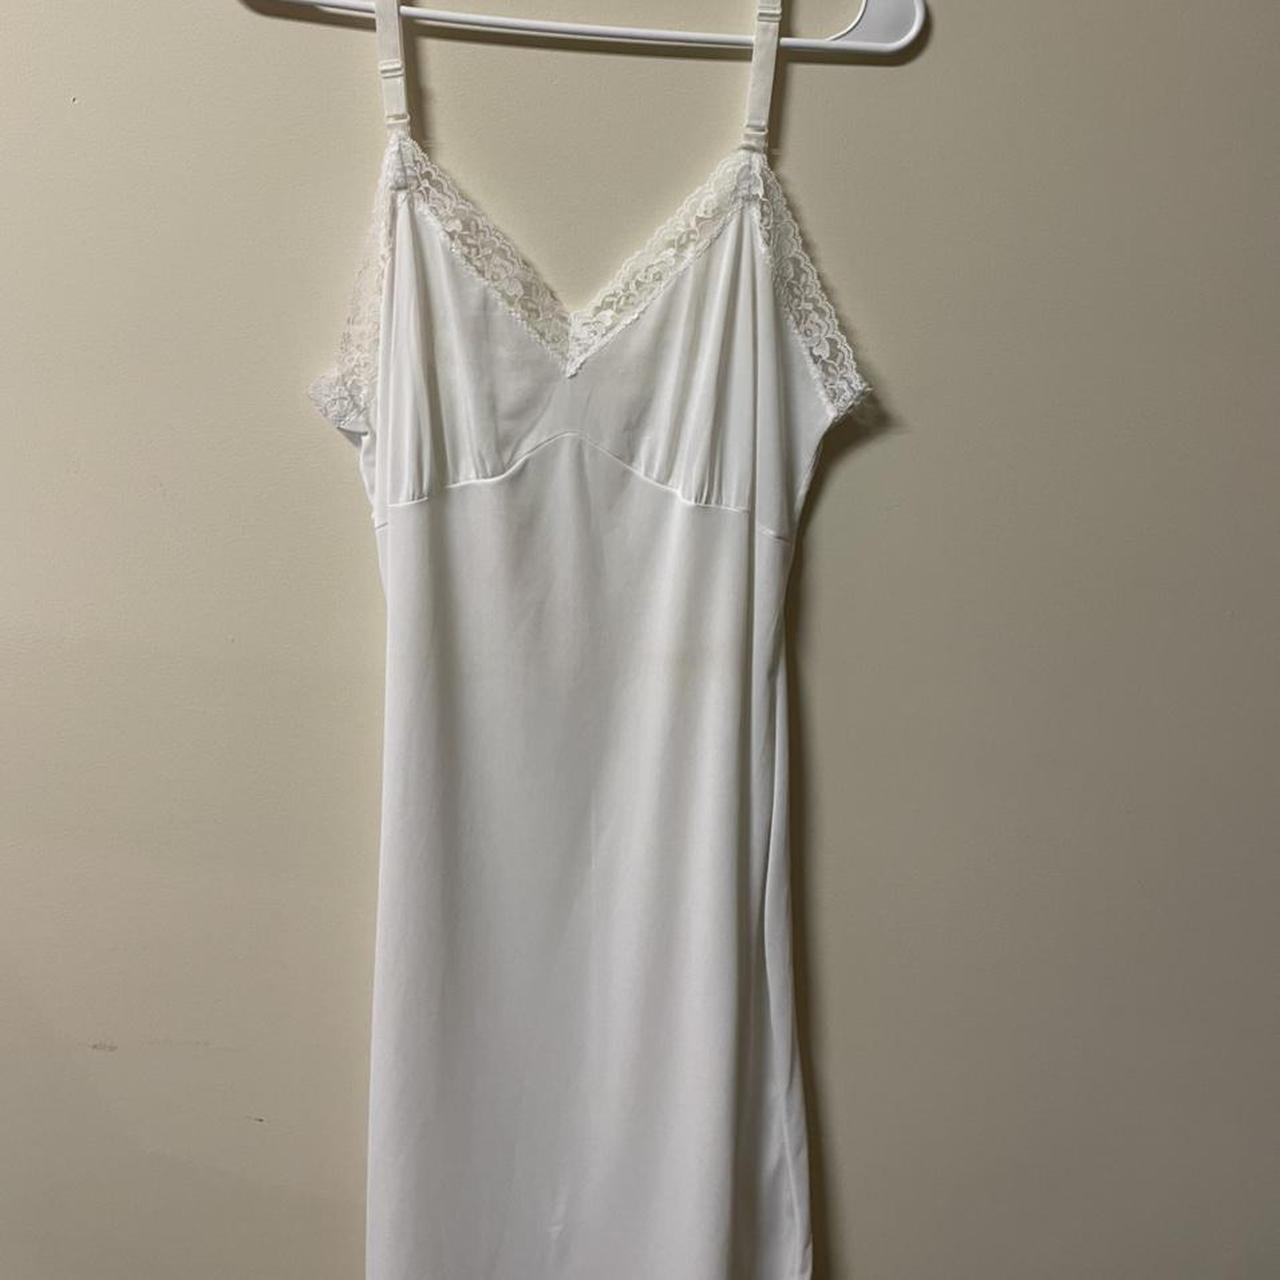 White Silk Dress with Lace Trim Slight stain pictured - Depop